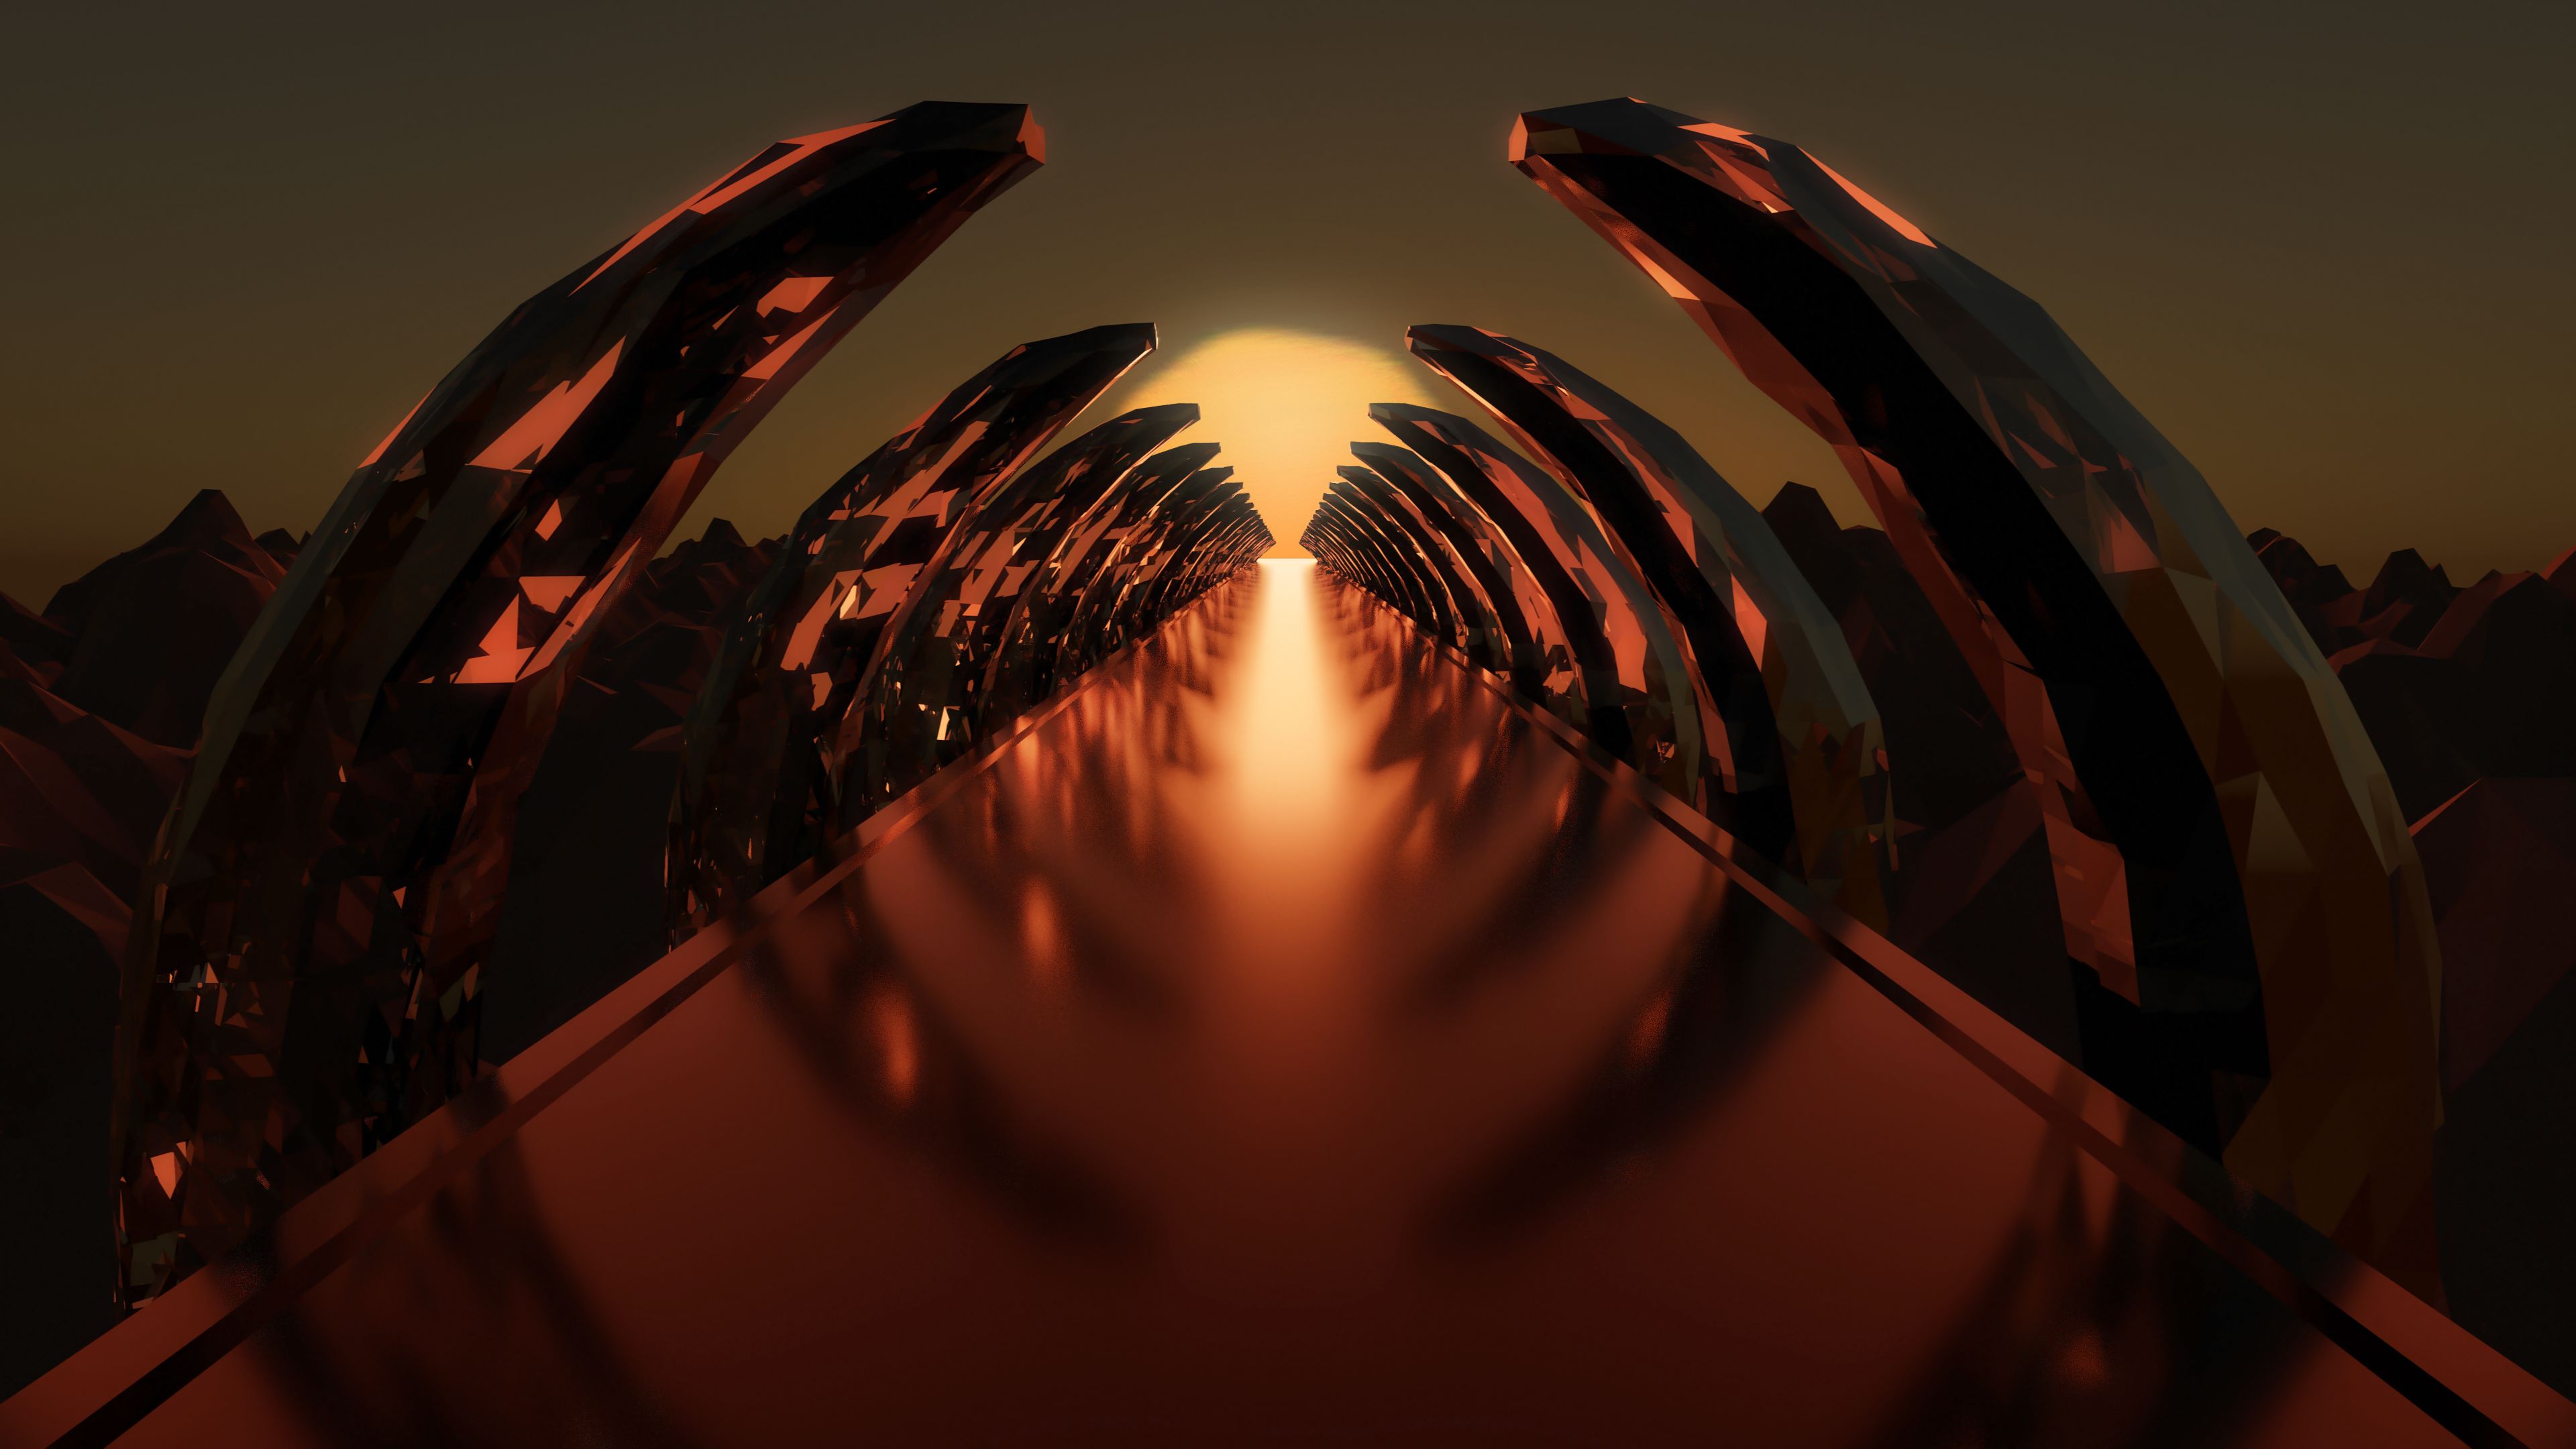 blender 3d, abstract, sci fi, morning, reflection, symmetry